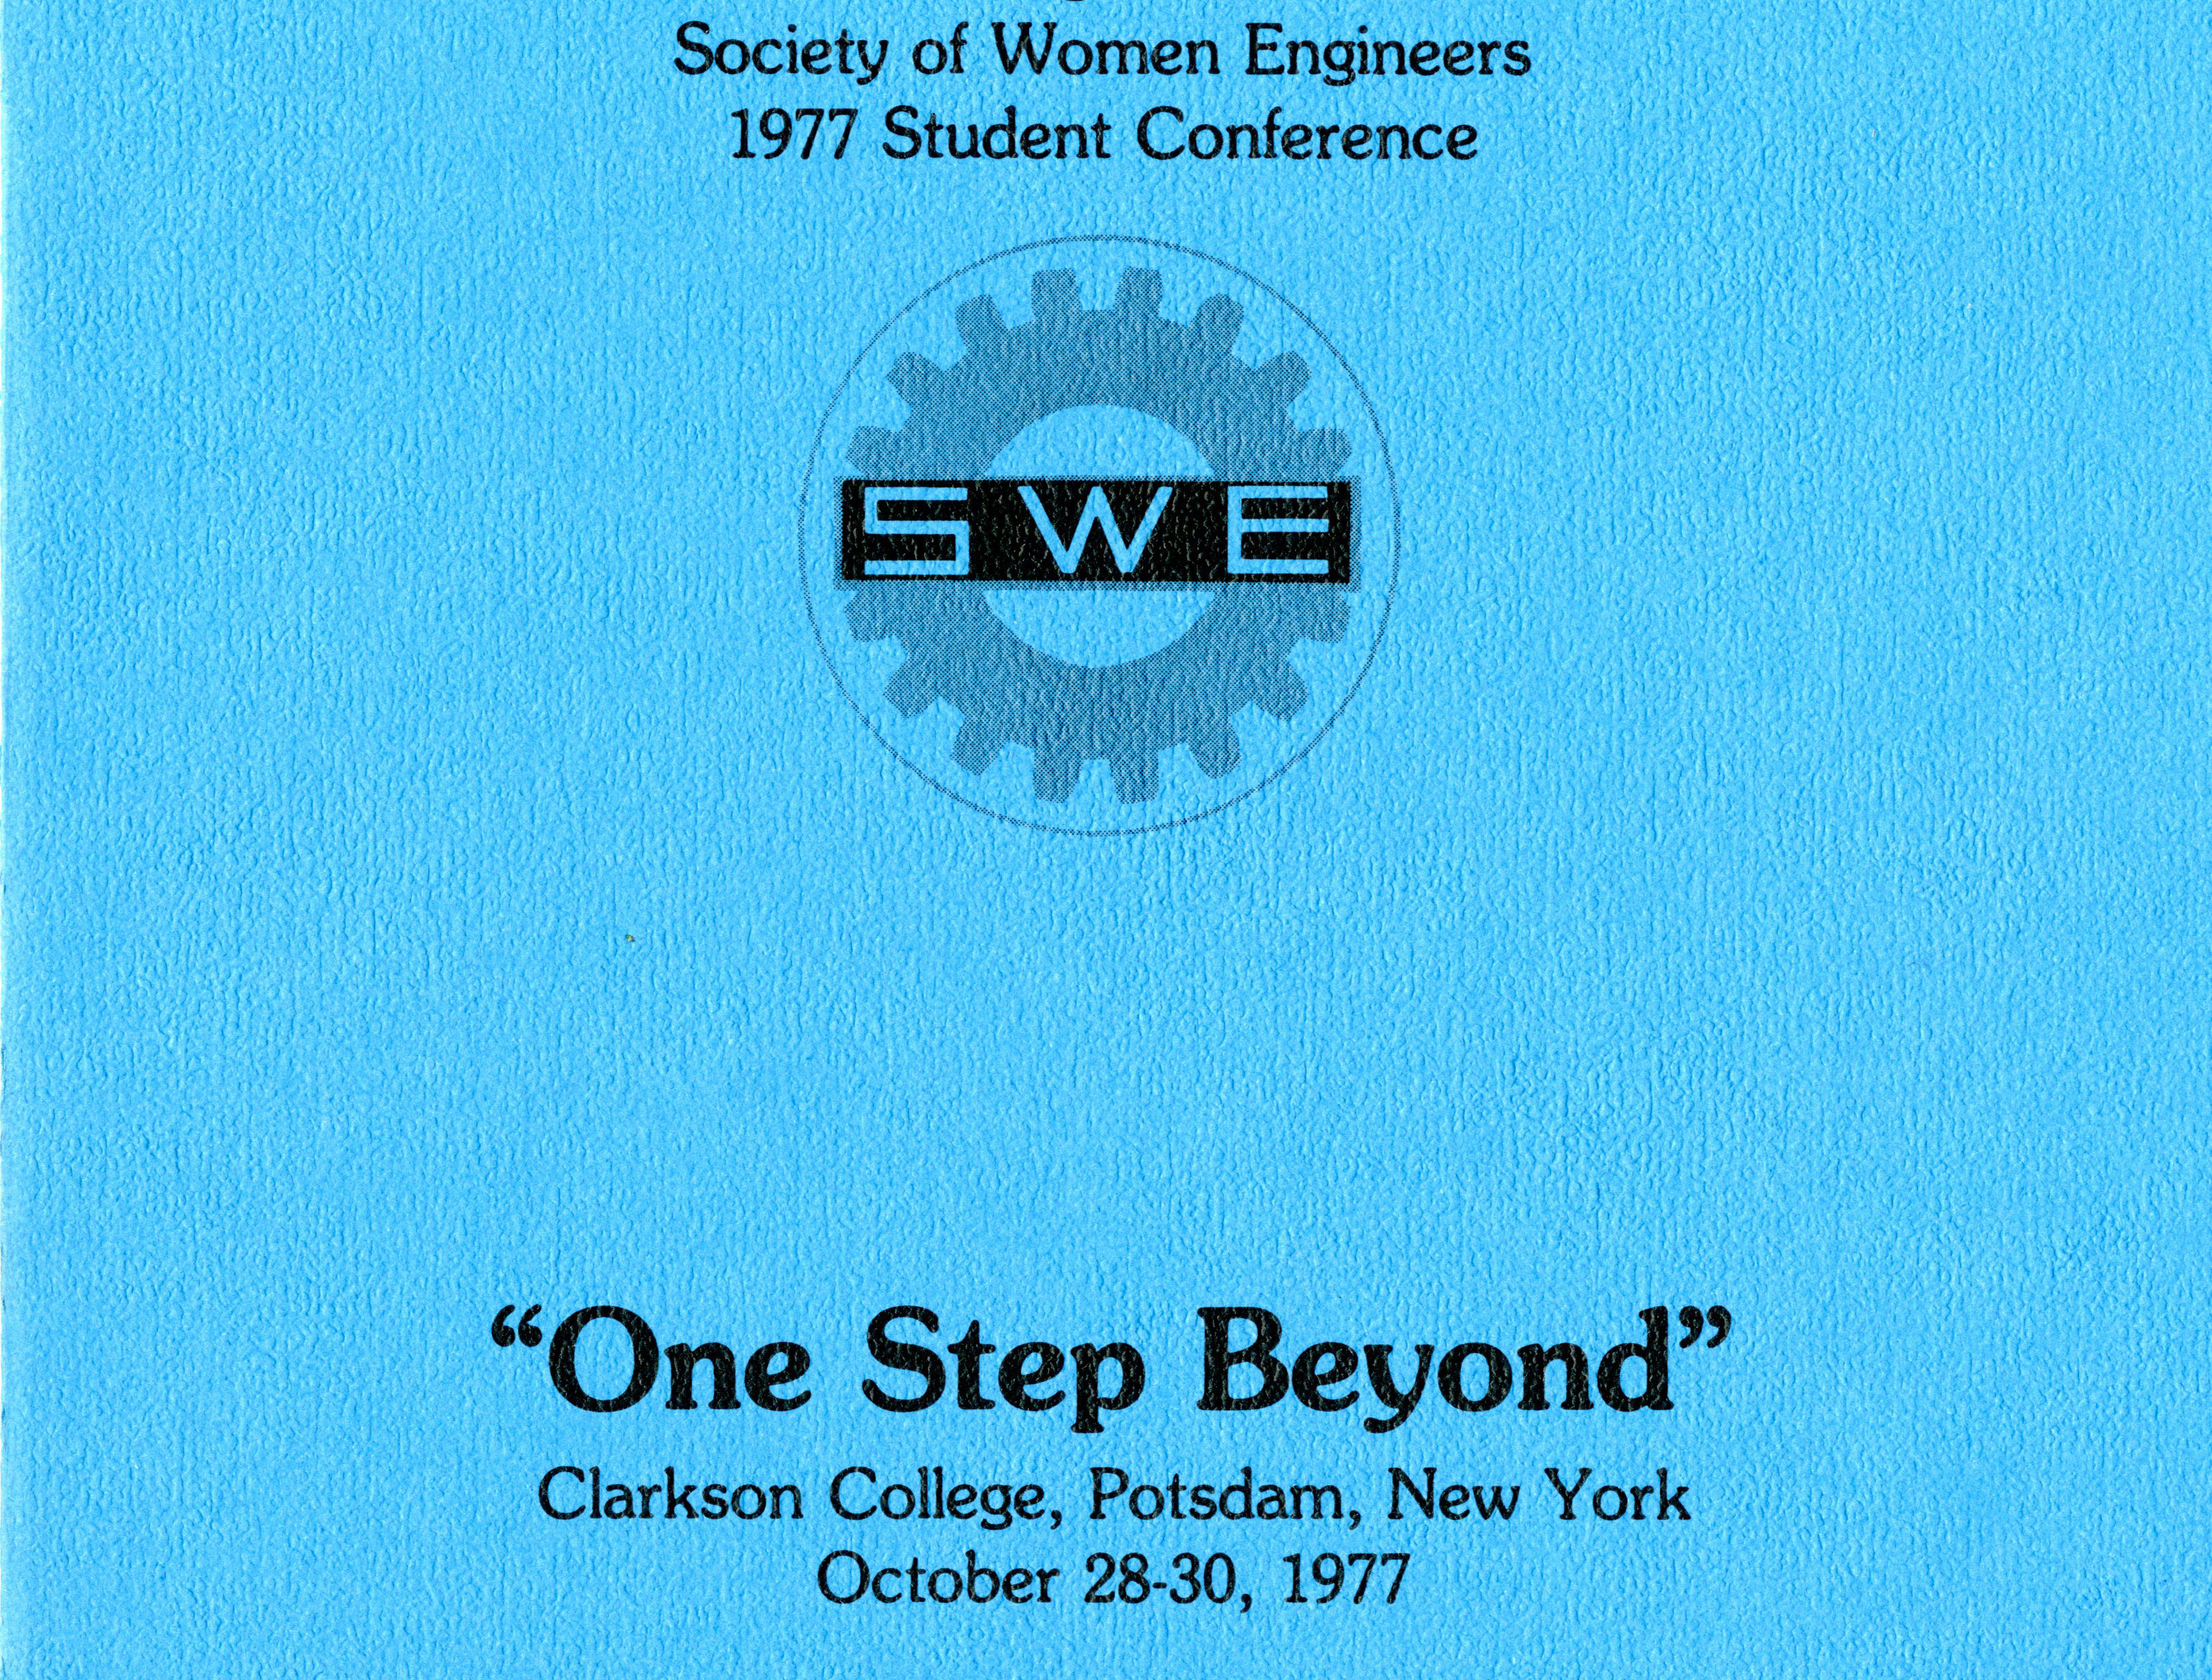 A pamphlet cover from the SWE Regional Conference held at Clarkson, 1977